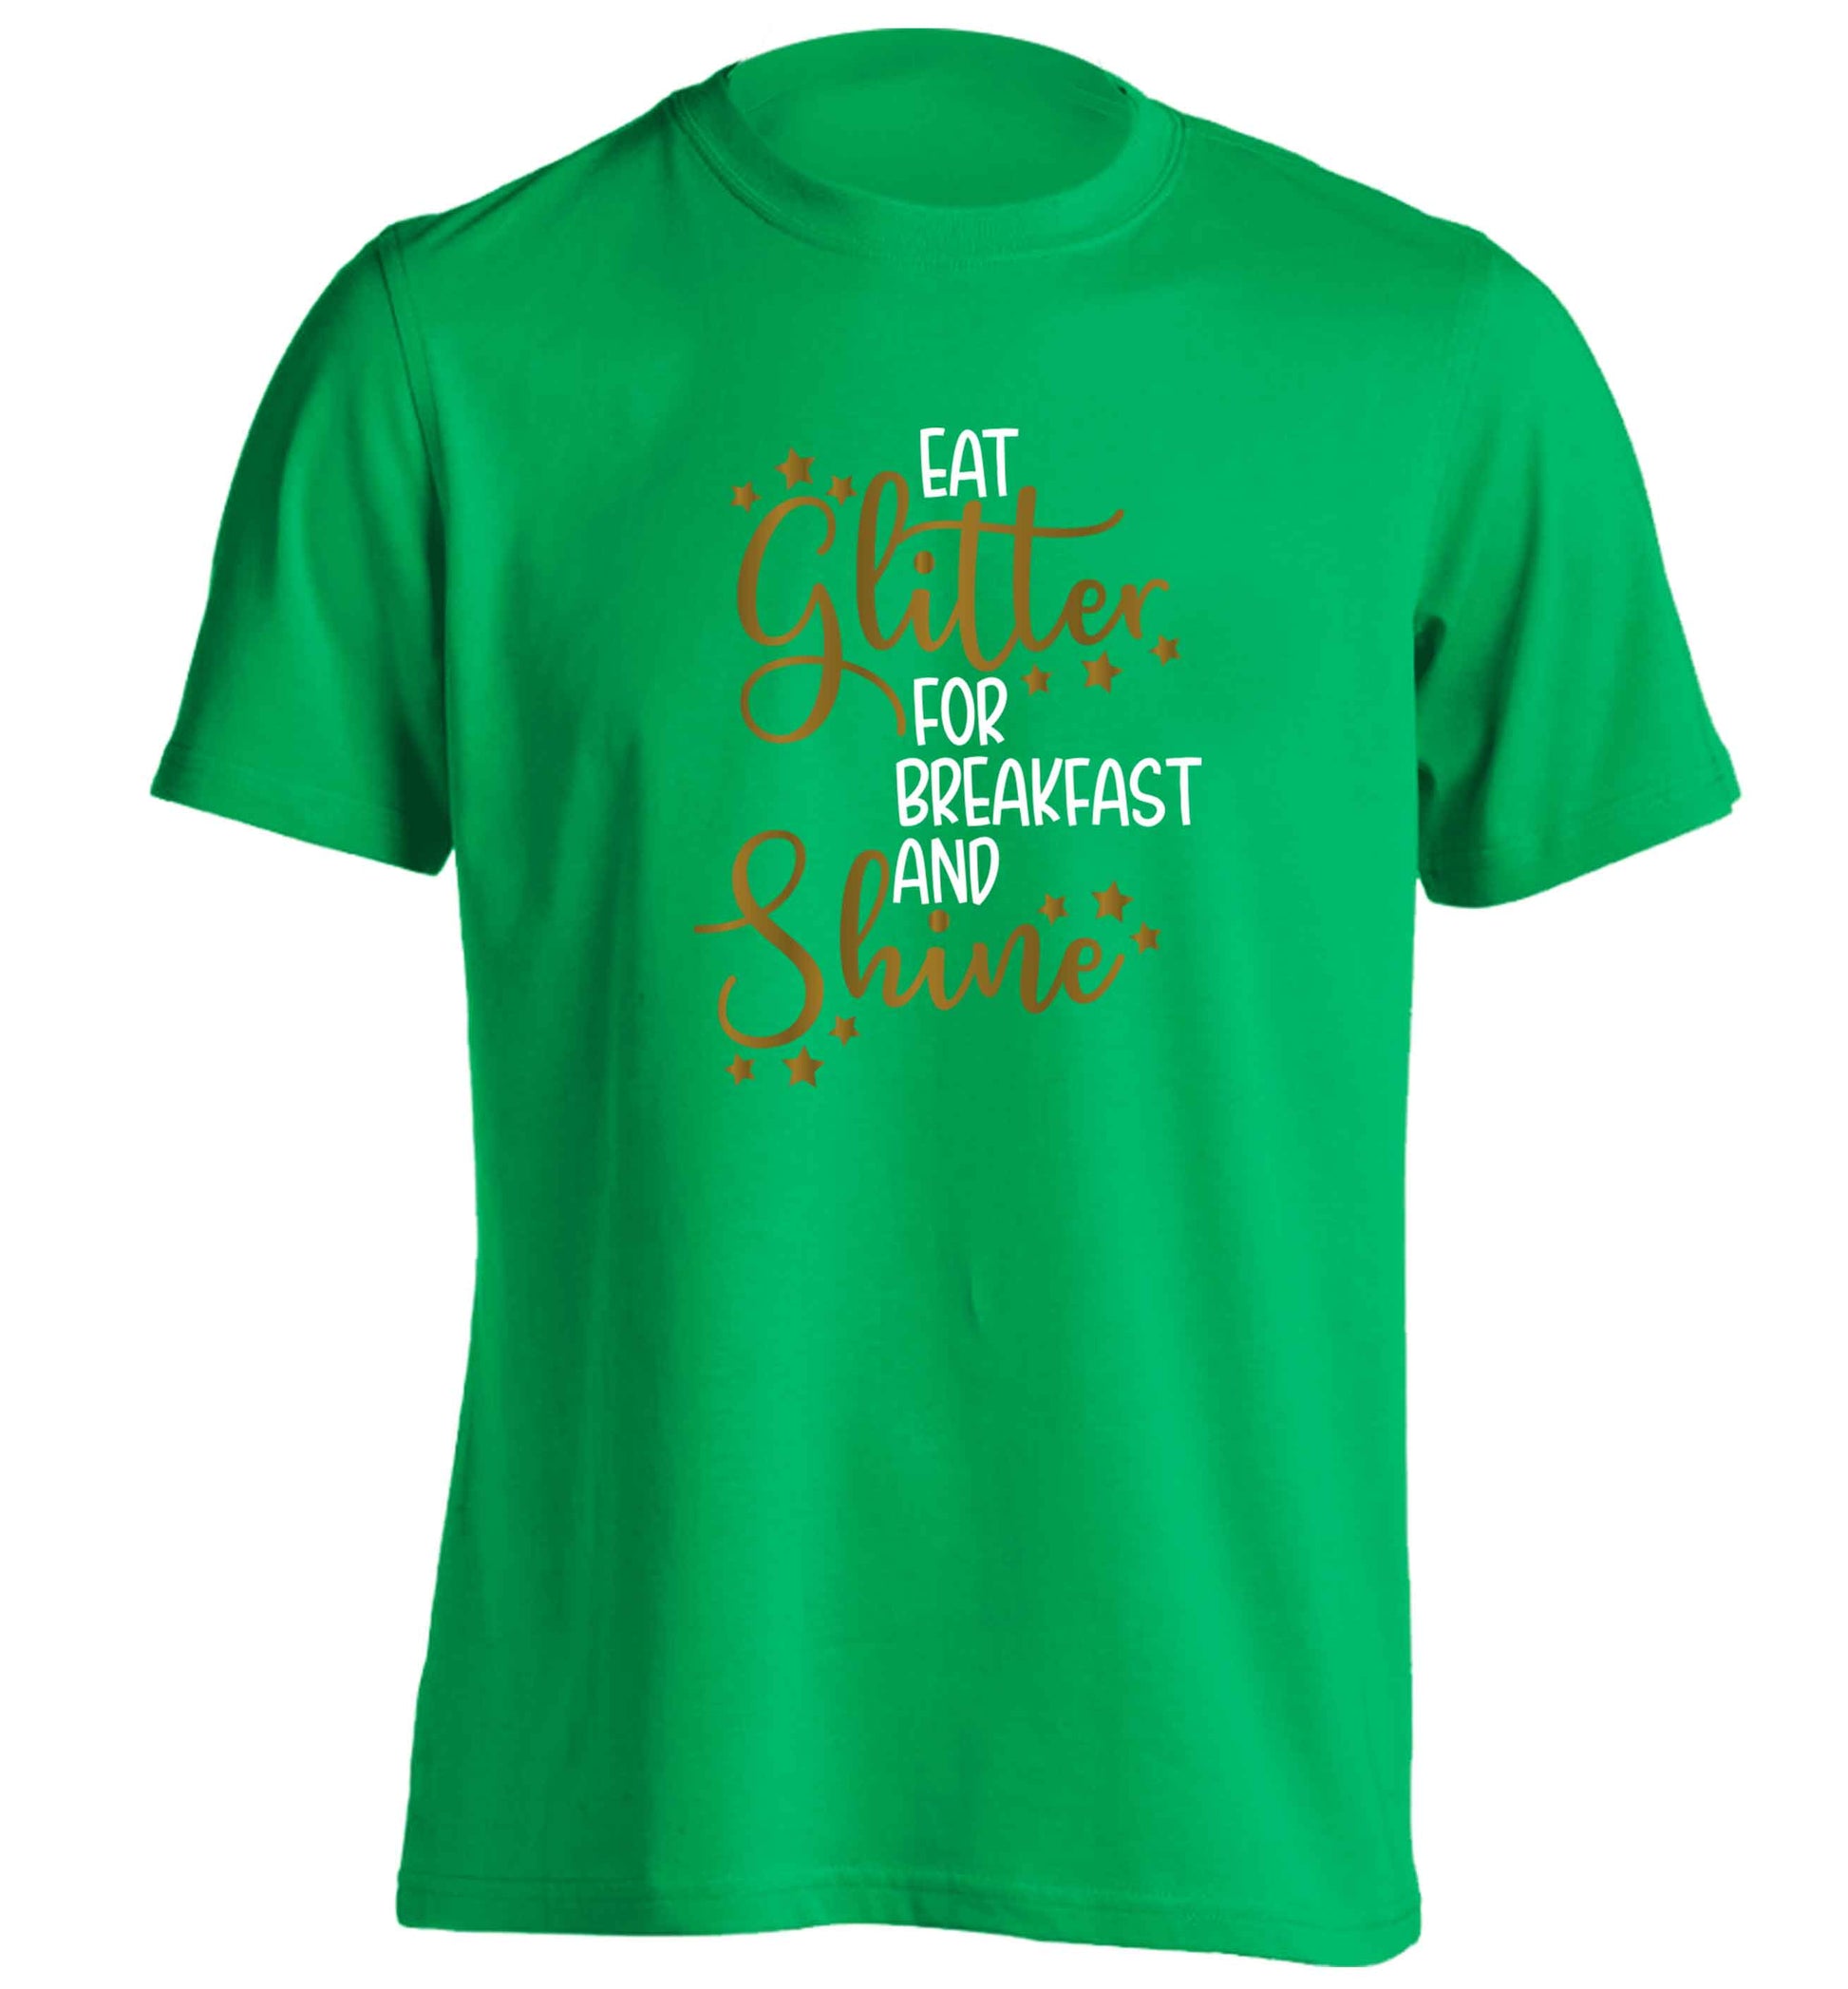 Eat glitter for breakfast and shine all day adults unisex green Tshirt 2XL